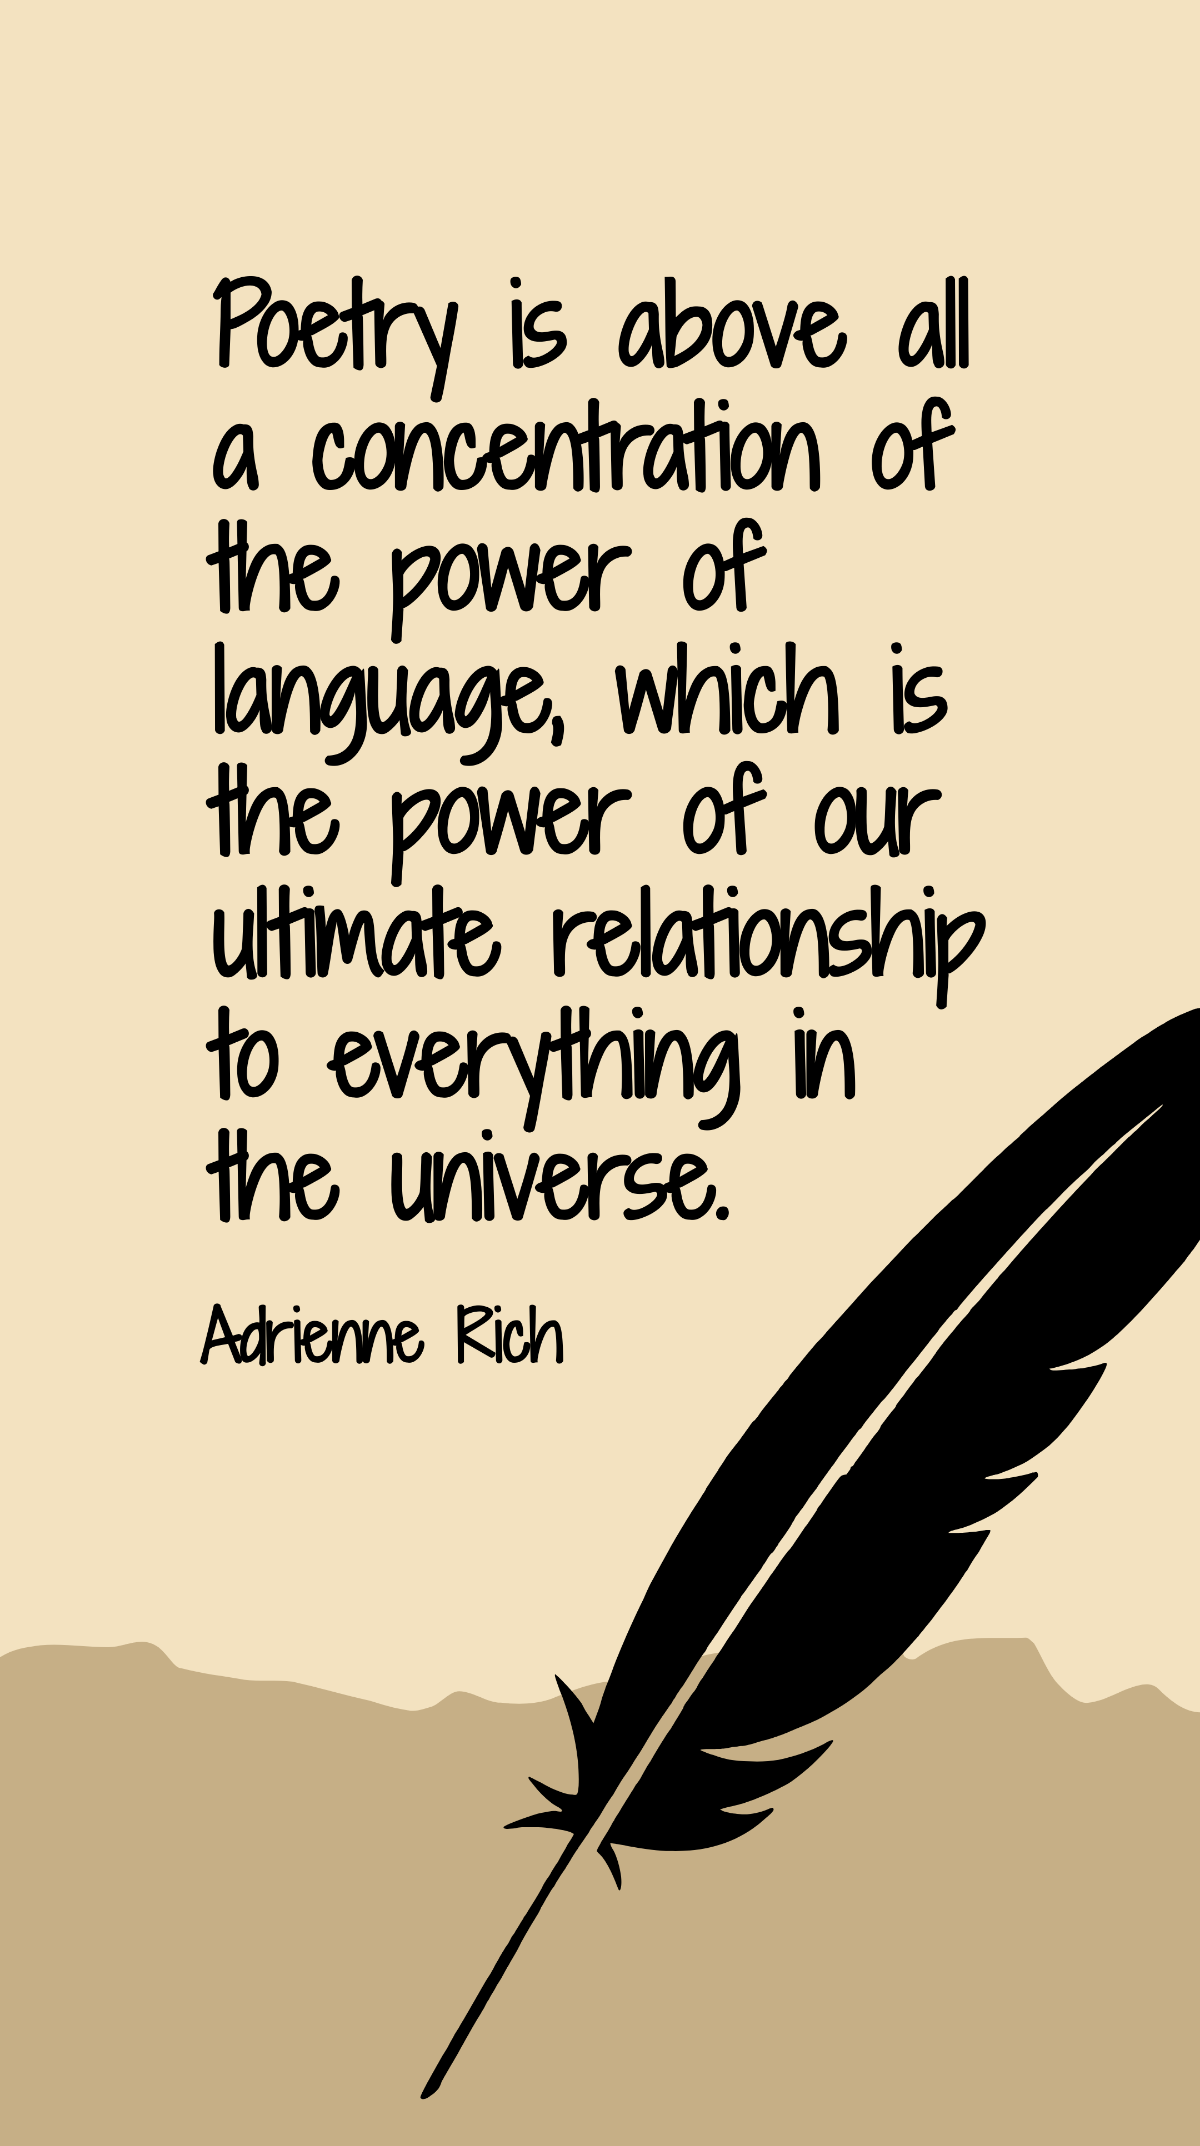 Adrienne Rich - Poetry is above all a concentration of the power of language, which is the power of our ultimate relationship to everything in the universe. Template